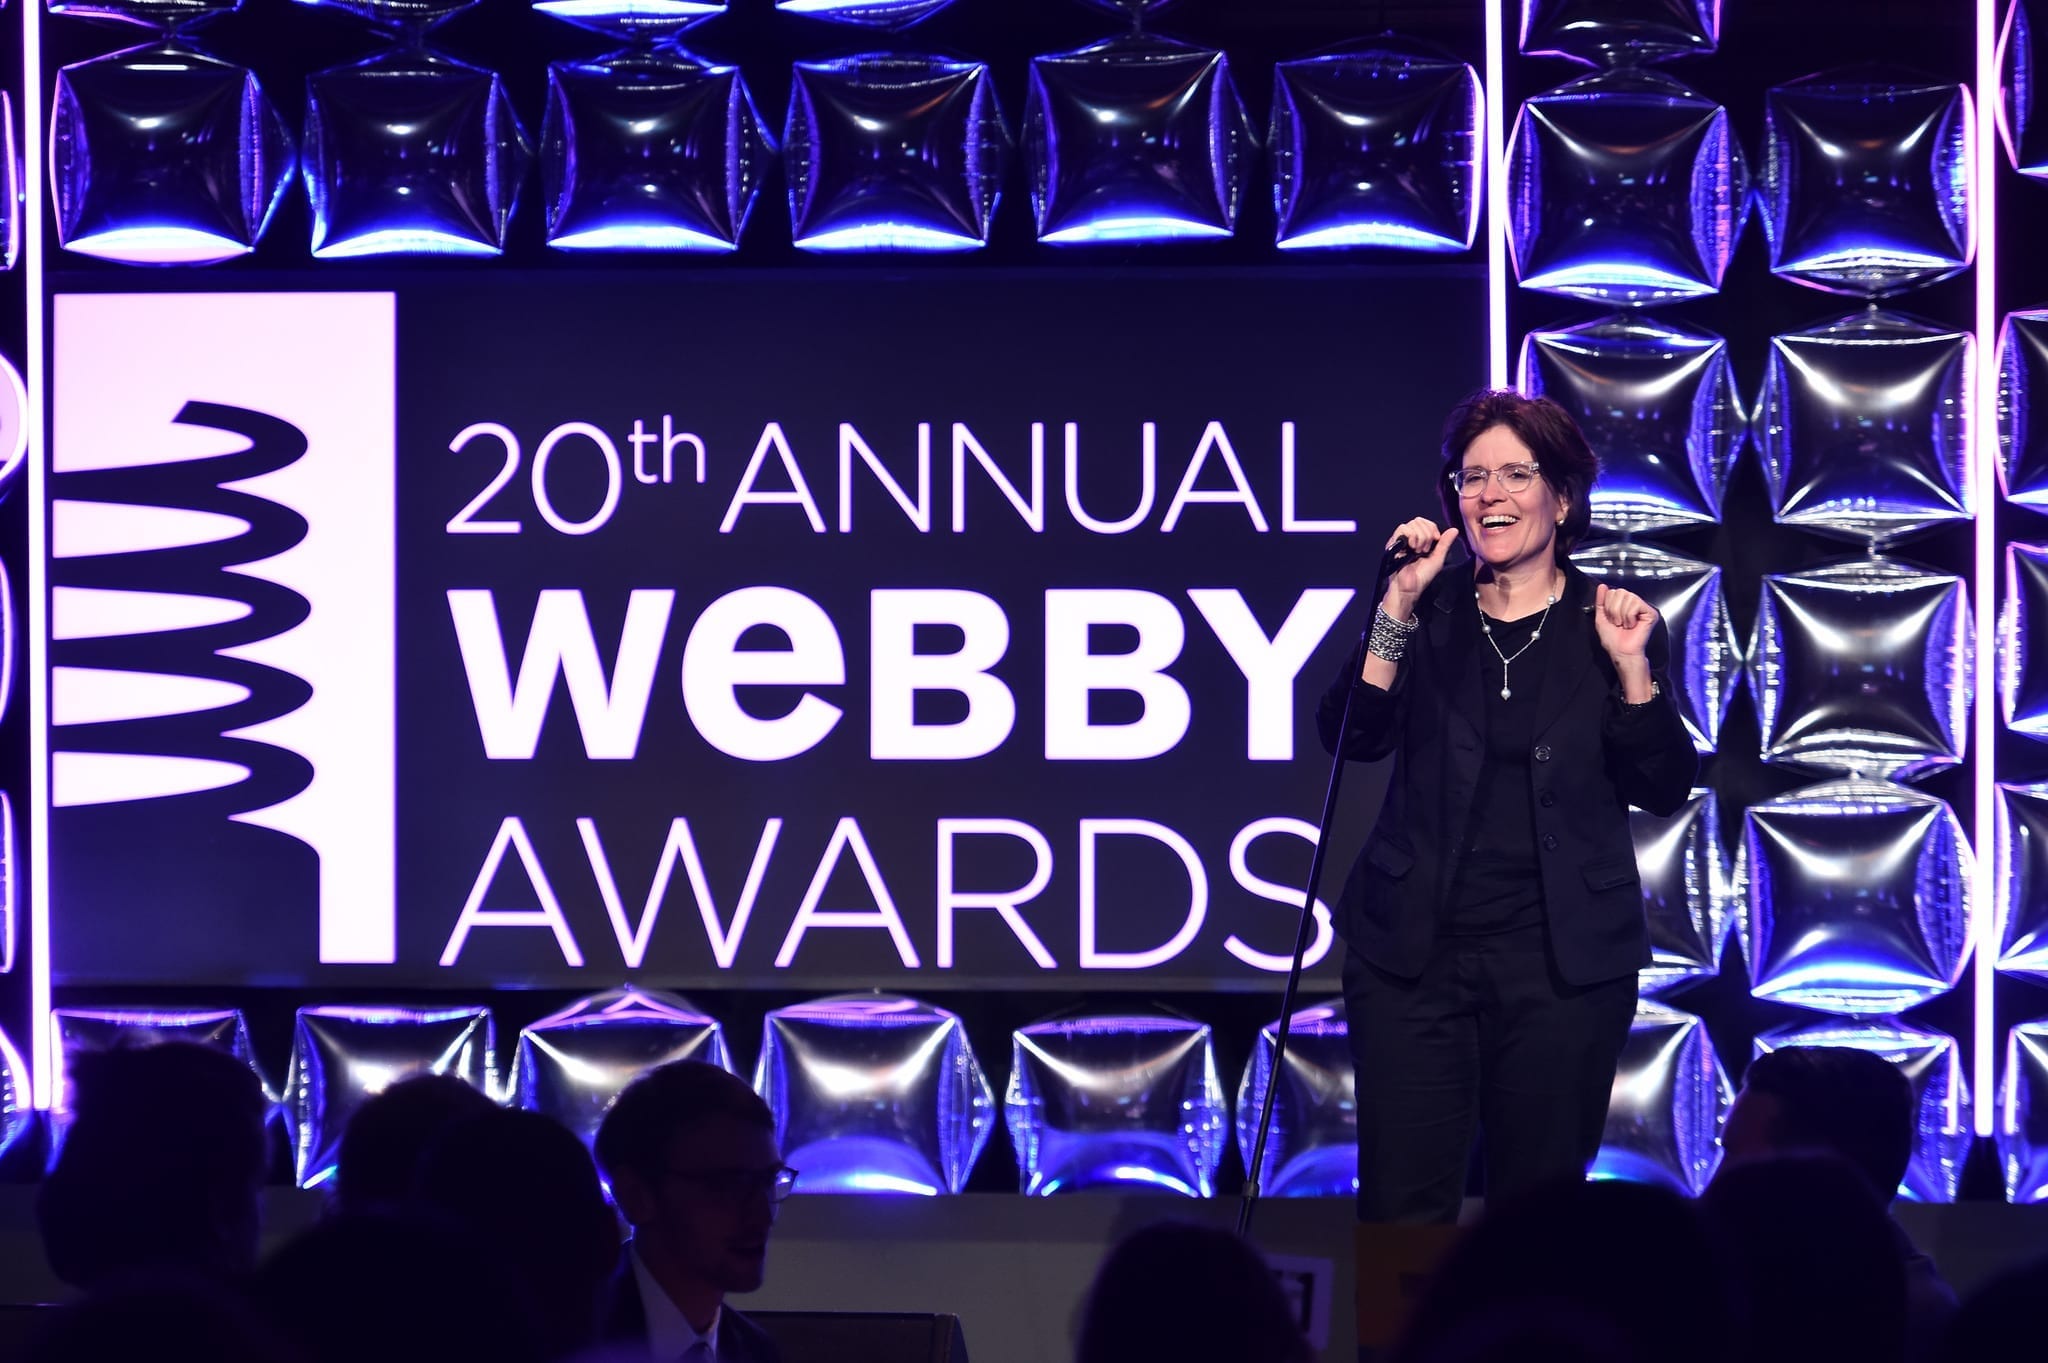 Recode Host Kara Swisher Onstage At The 20th Annual Webby Awards as she Presents to the Breaking the Internet Special Achievement Award to Kim Kardashian